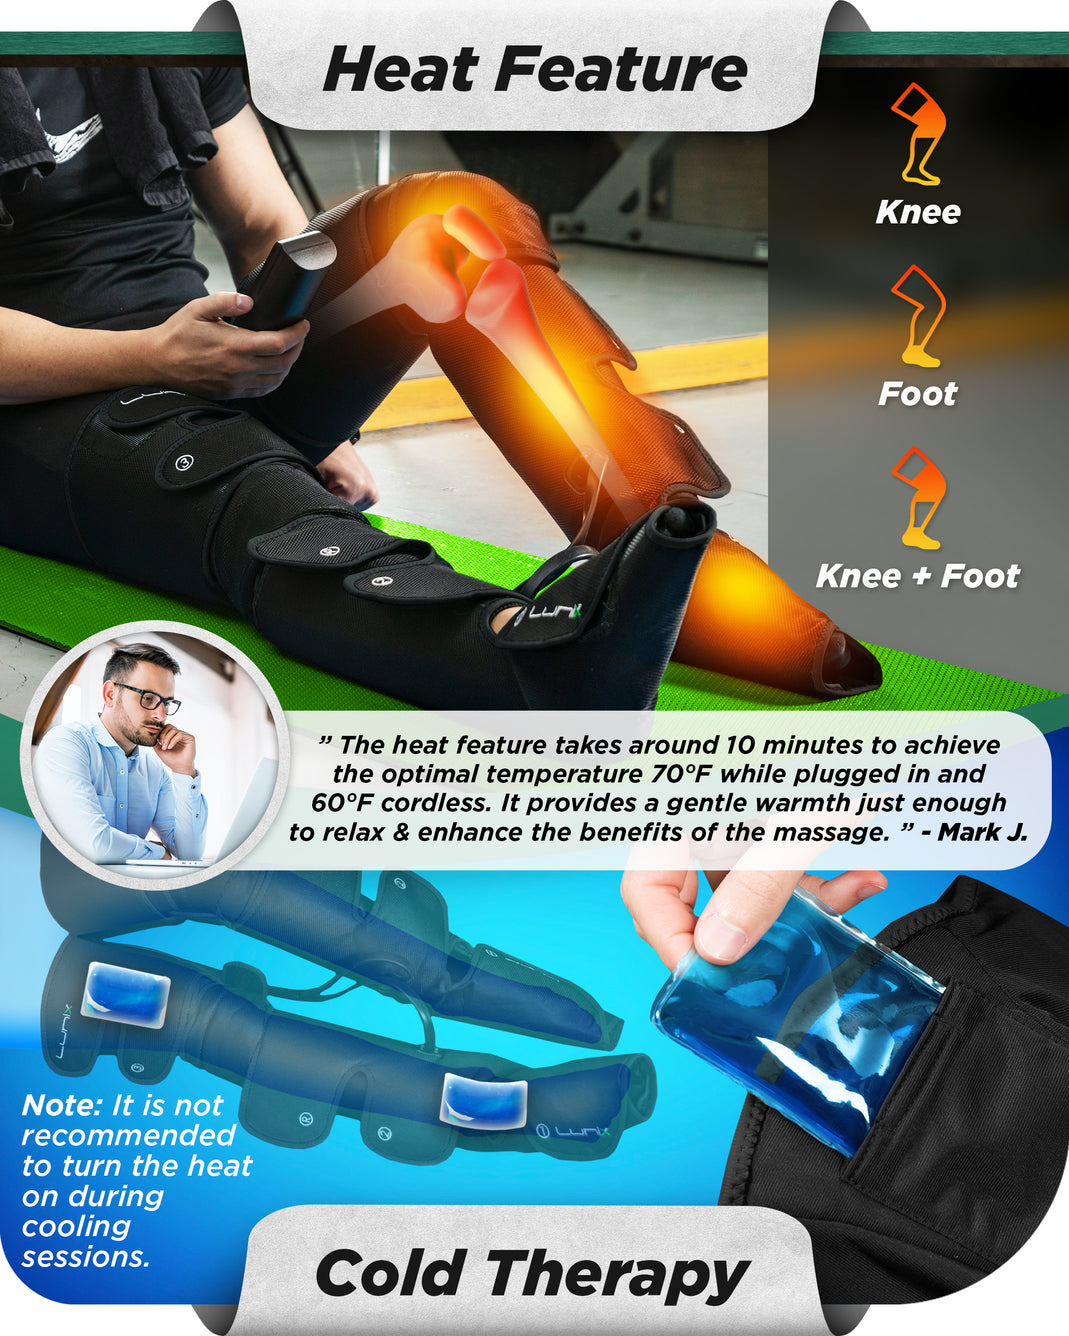 LX10 FULL LEG COMPRESSION MASSAGER, WITH HOT/COLD PACK BLACK